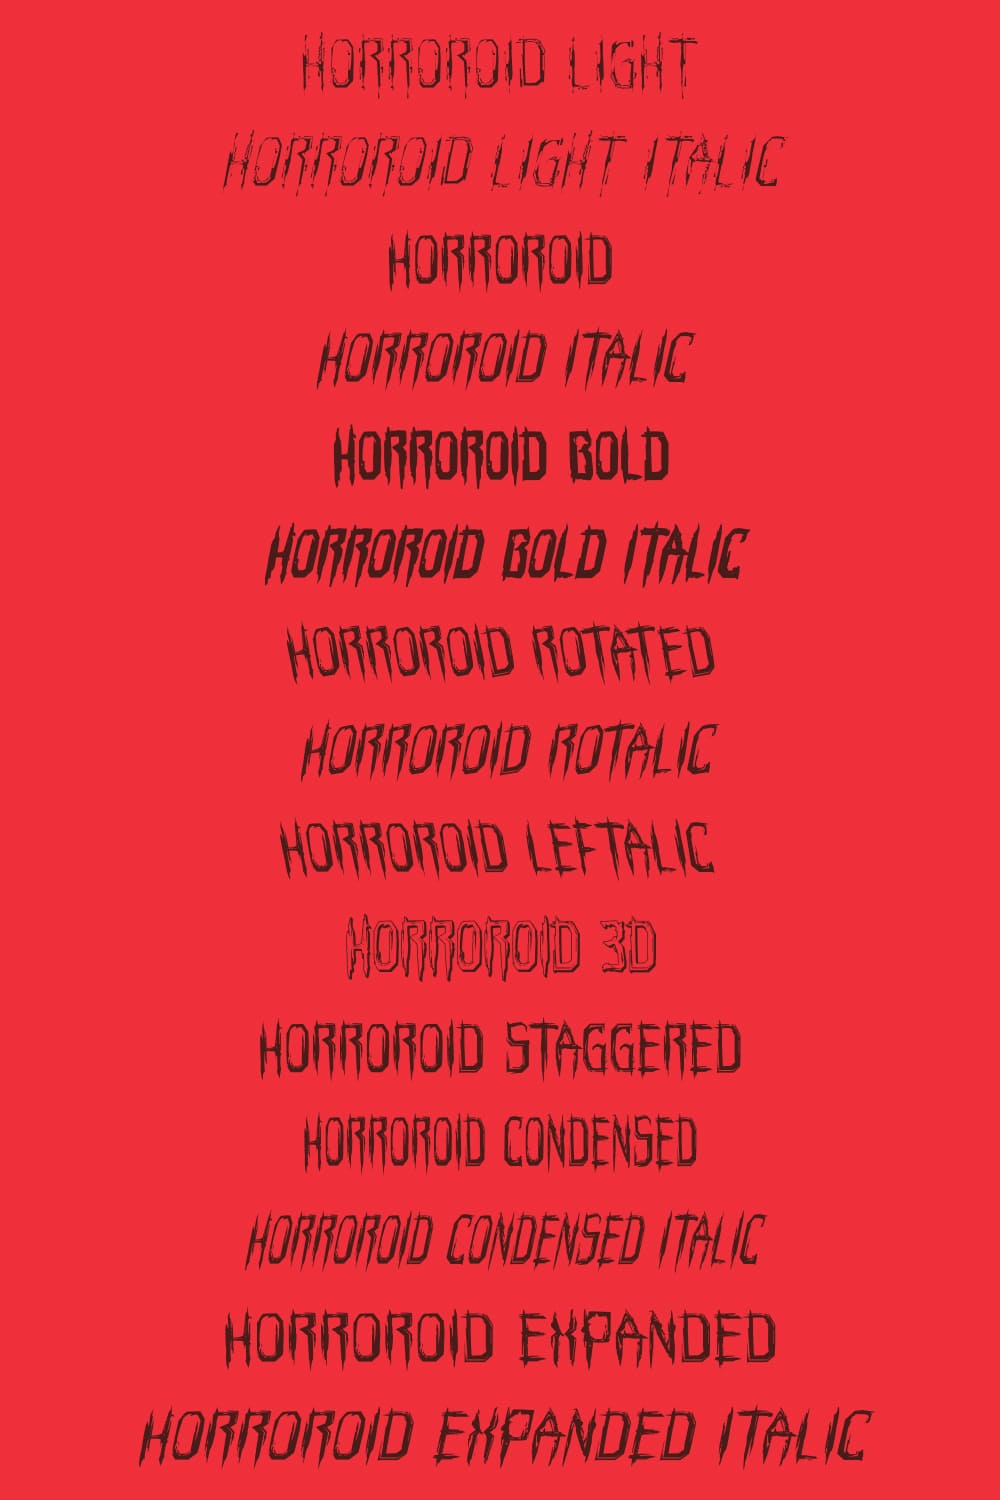 All horror font style.